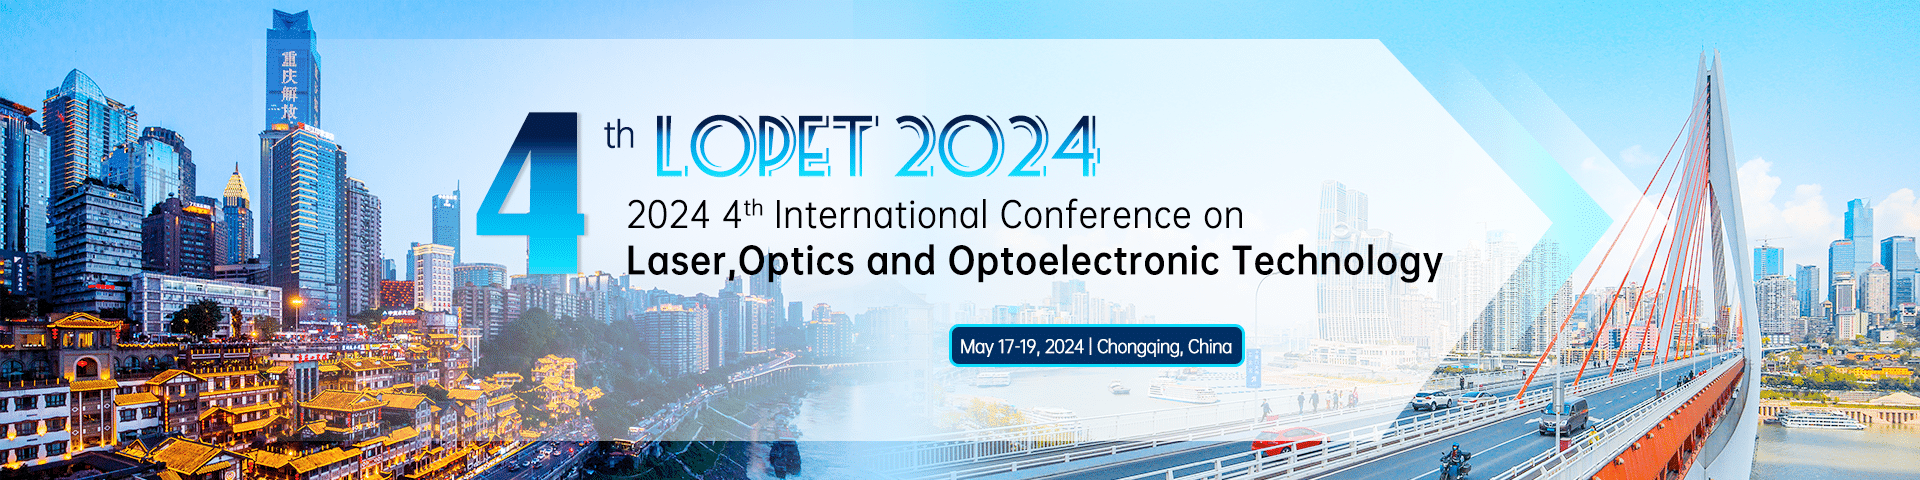 2024 4th International Conference on Laser, Optics and Optoelectronic Technology (LOPET 2024)